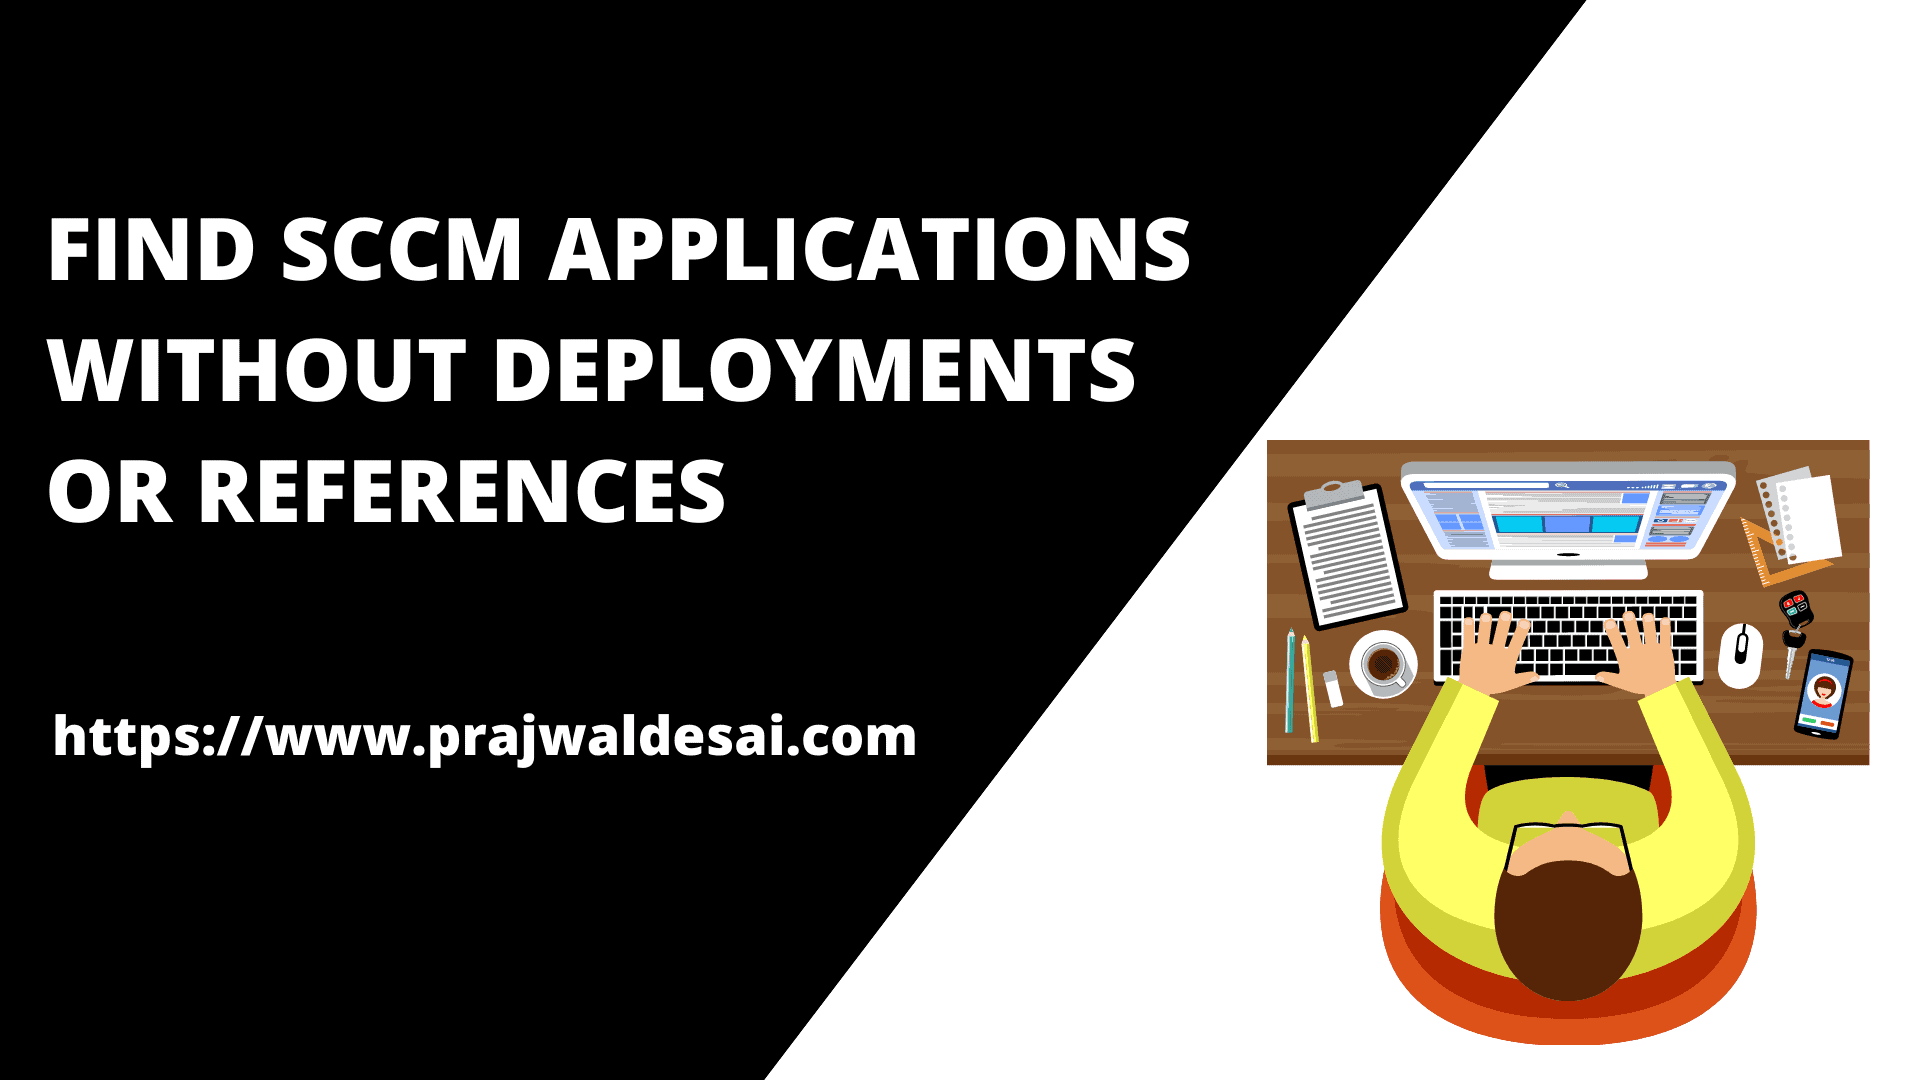 Find SCCM Applications Without Deployments